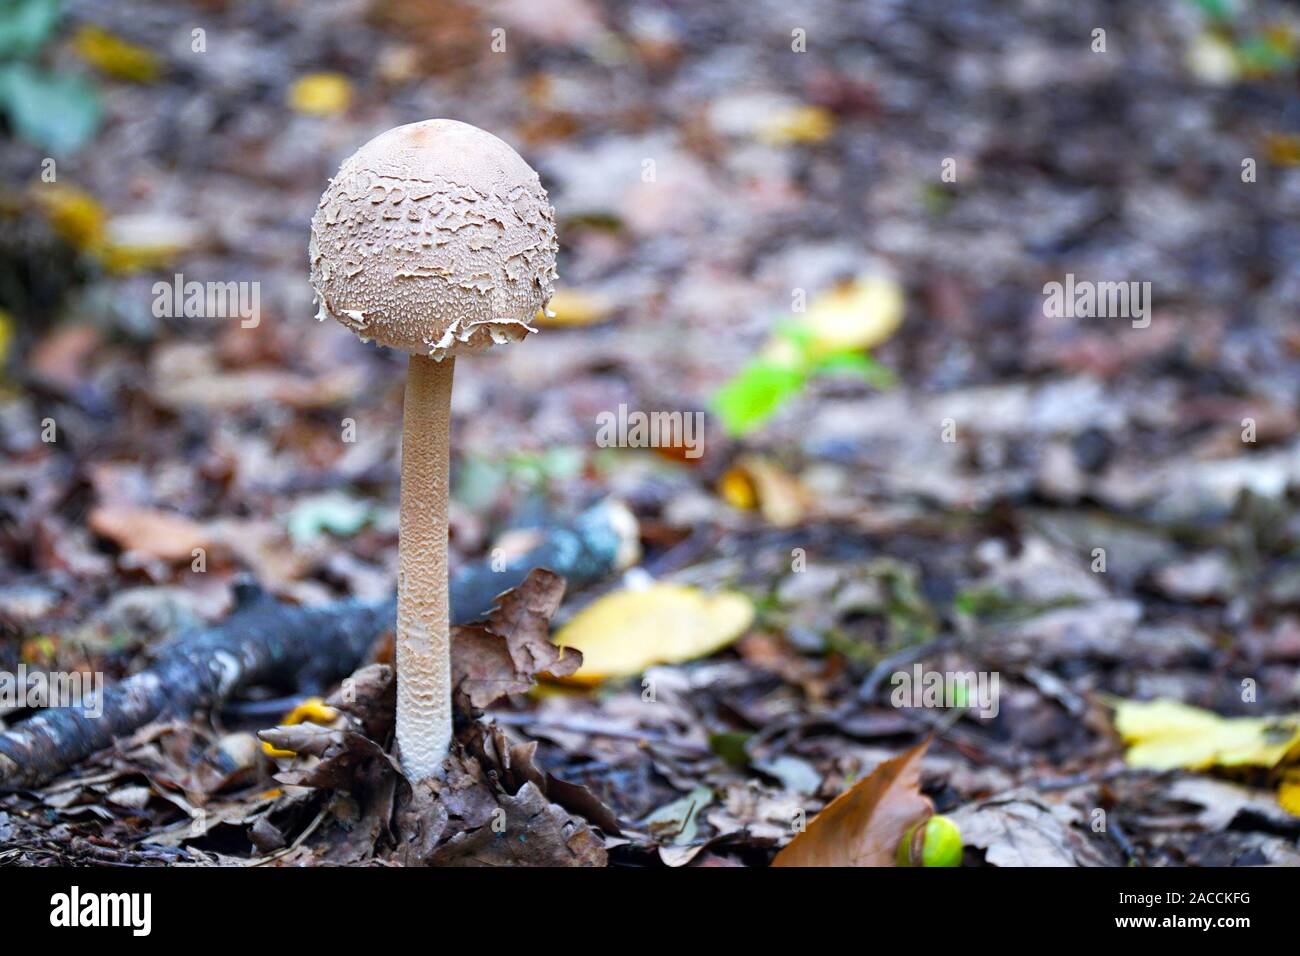 Poisonous inedible mushroom growing in the forest. Stock Photo